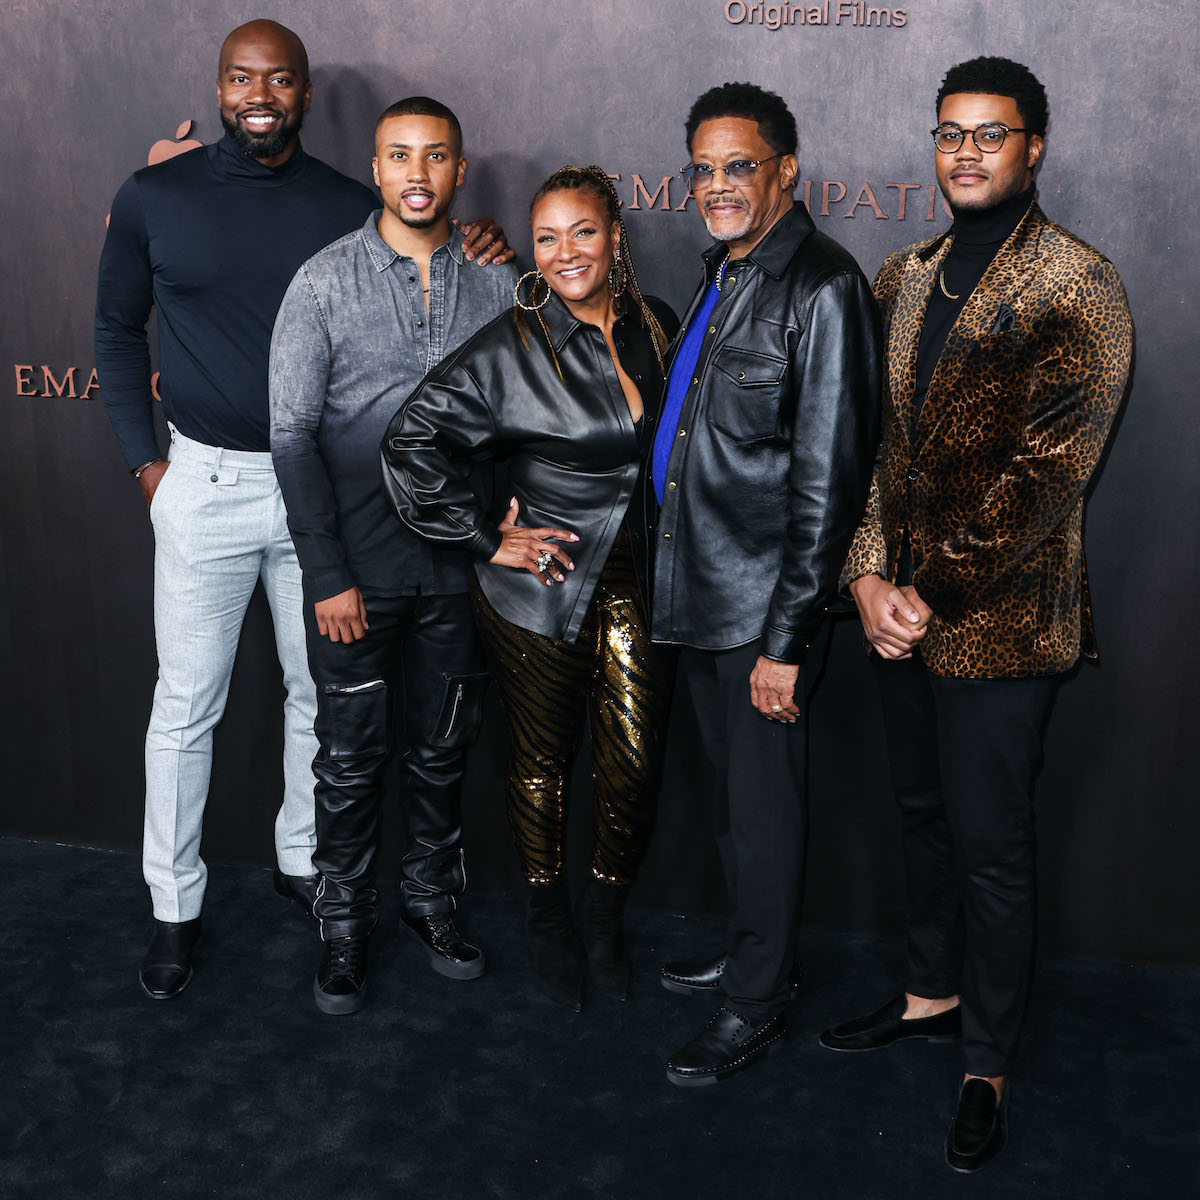 Mathis family attends Emancipation premiere